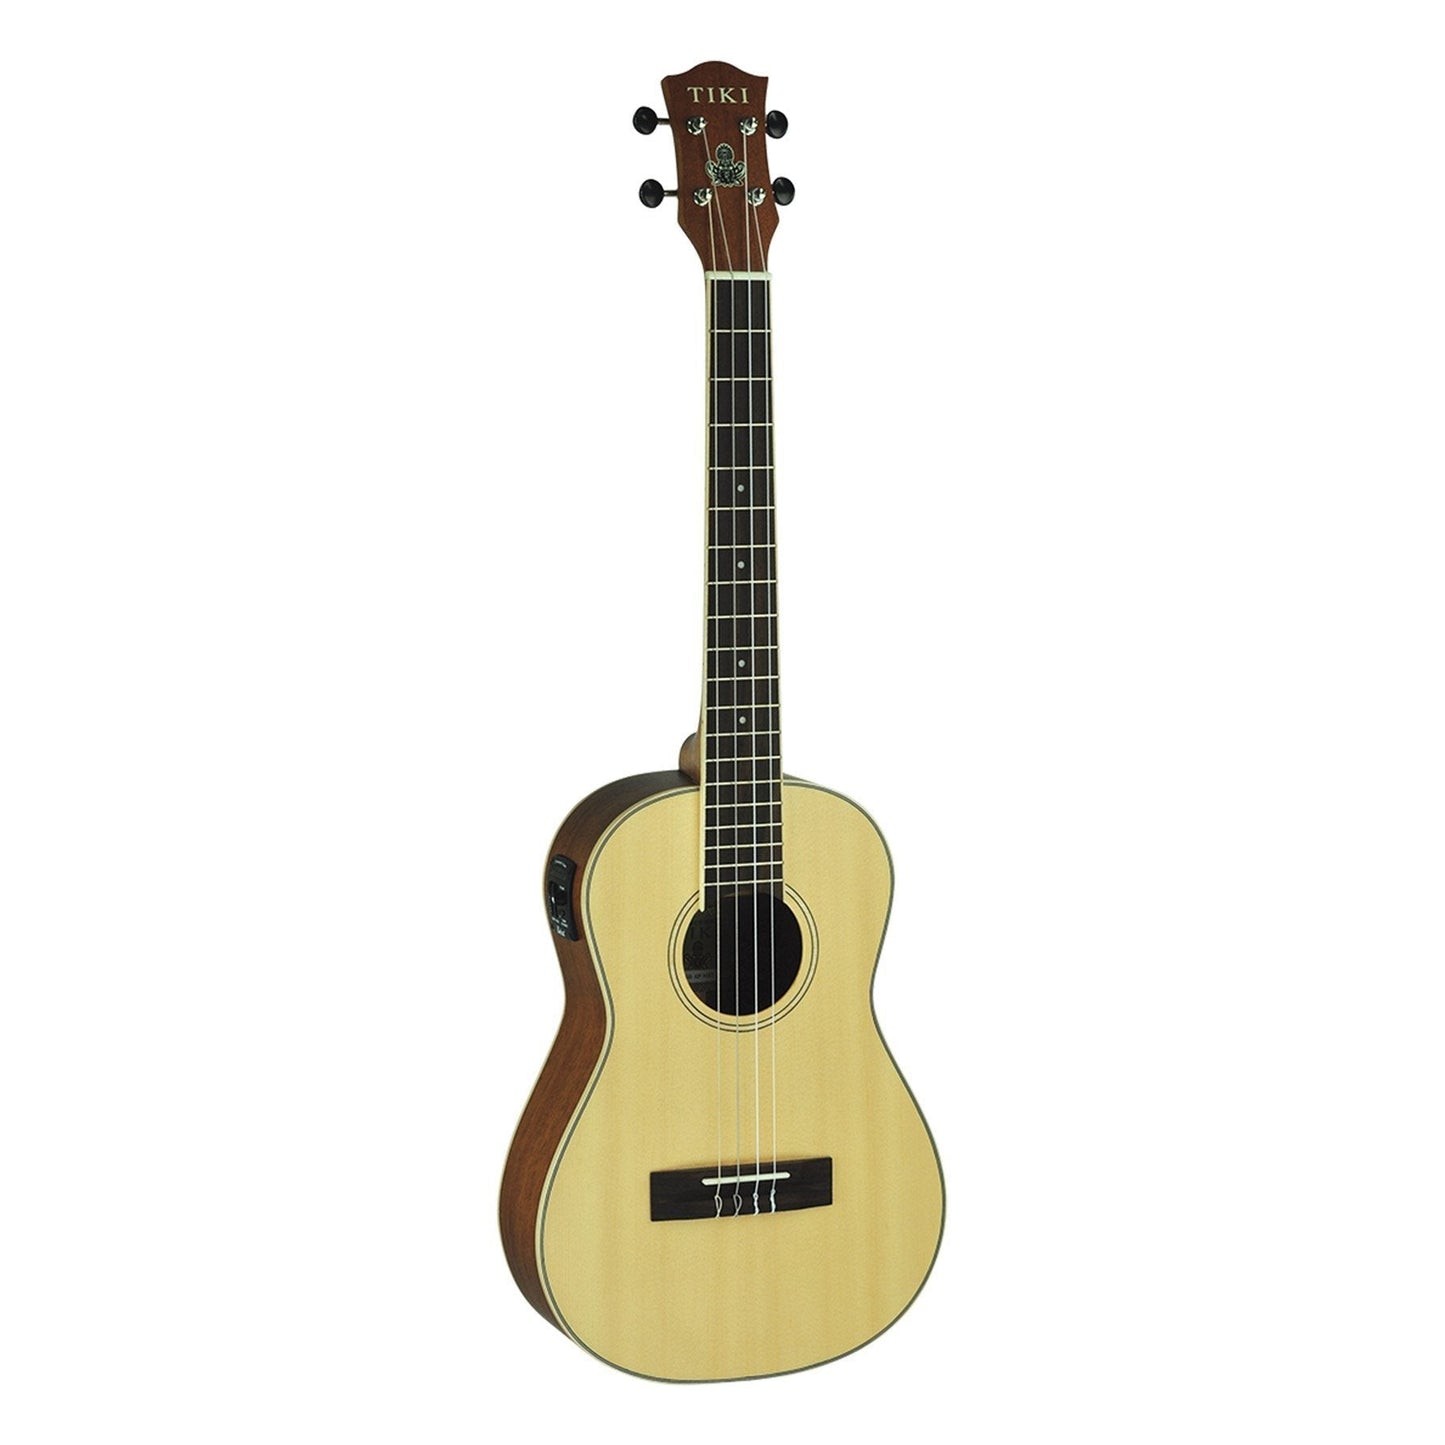 Tiki '6 Series' Spruce Solid Top Electric Baritone Ukulele with Hard Case (Natural Satin)